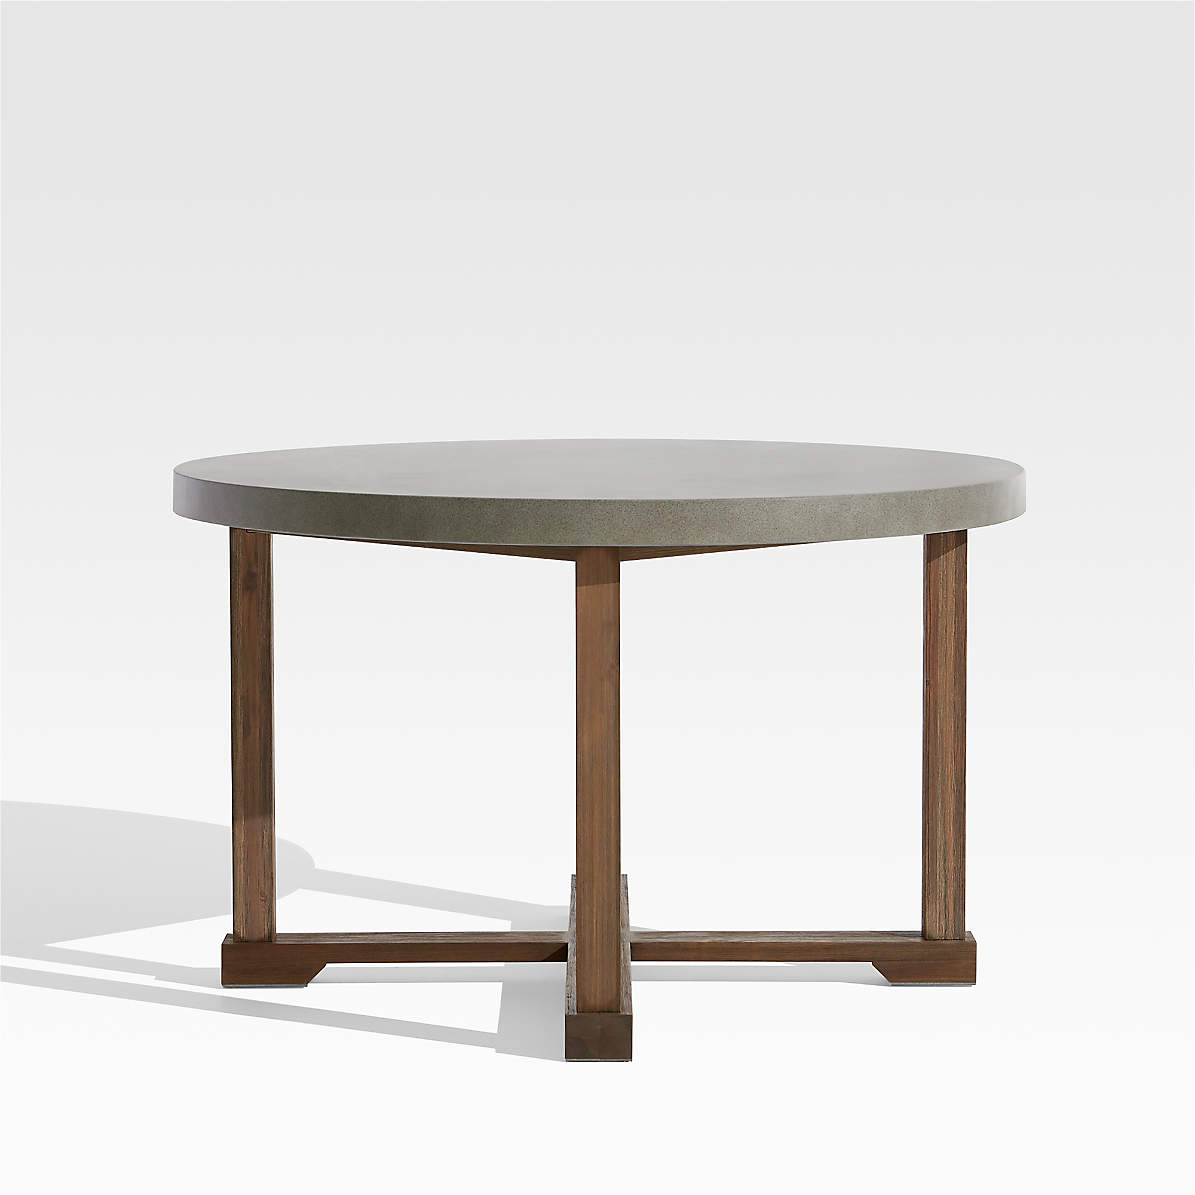 Abaco 48 Round Dining Table Reviews Crate And Barrel